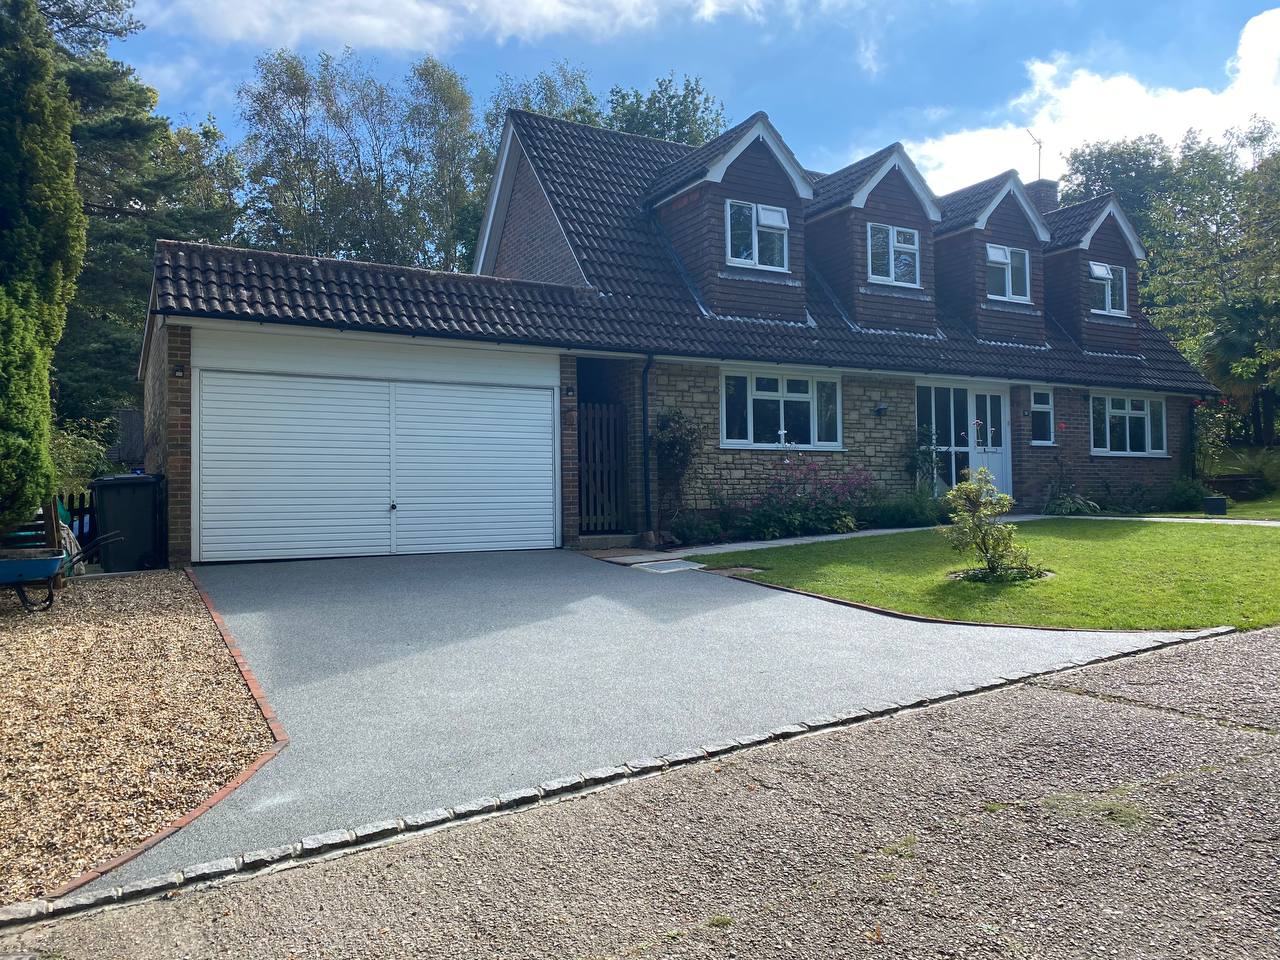 This is a photo of a resin driveway installed in Chelmsford by Chelmsford Resin Driveways